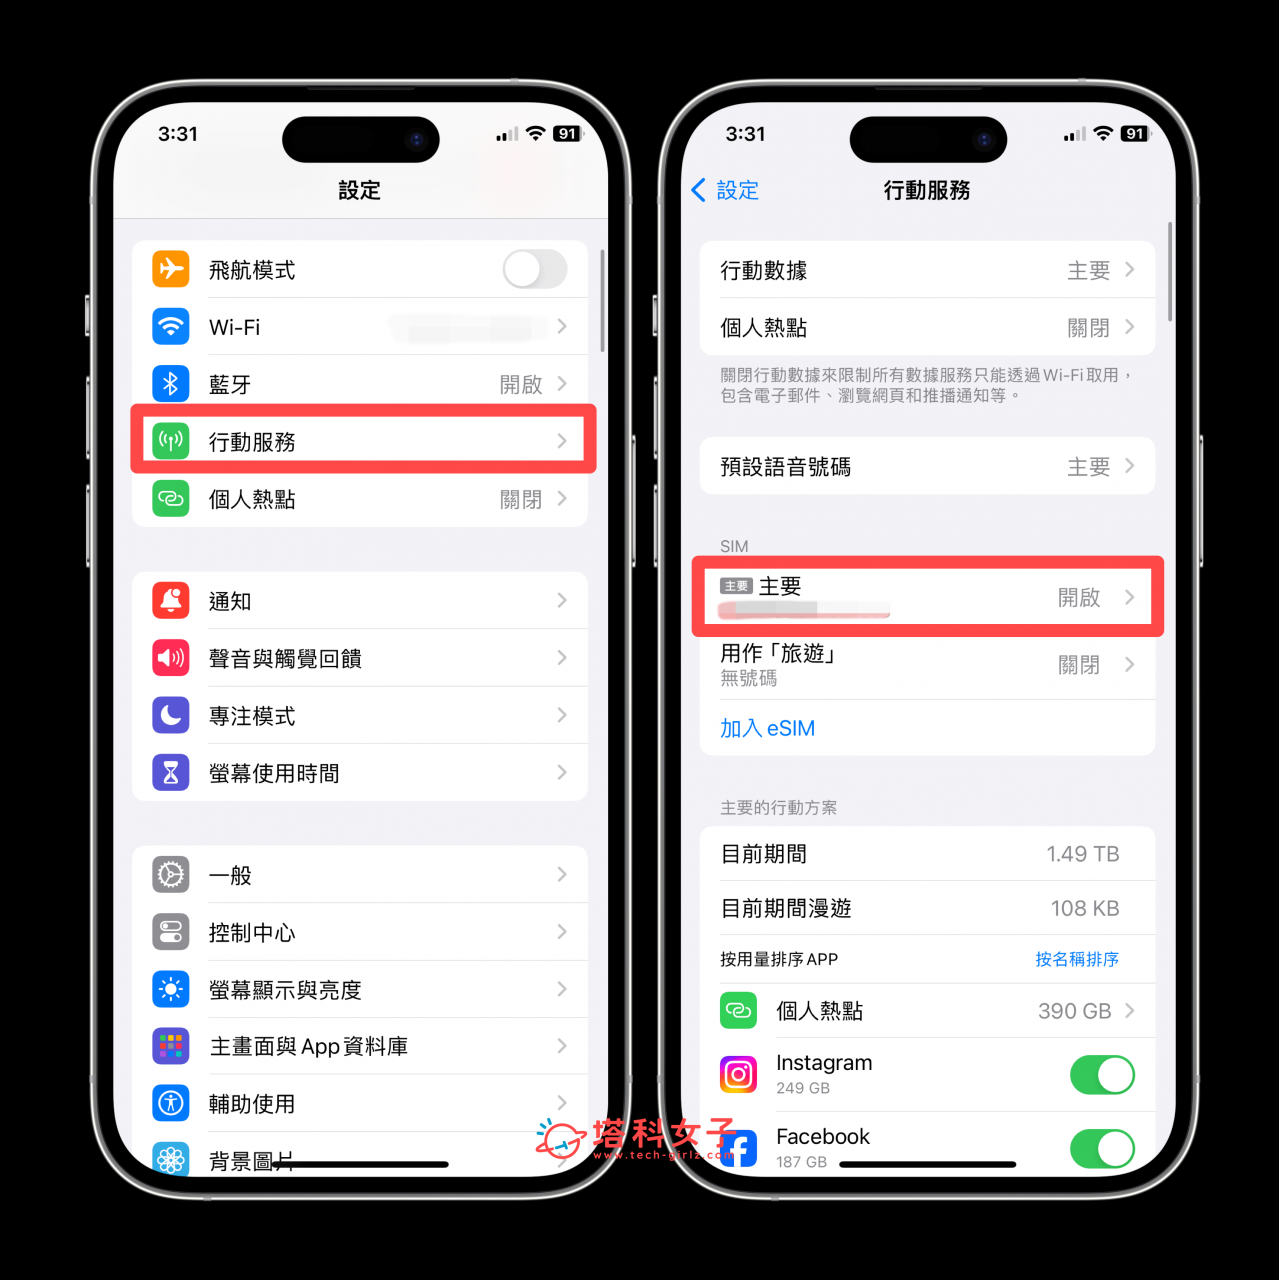 iPhone VoLTE 设定教学，开启VoLTE和VoWiFi通话功能